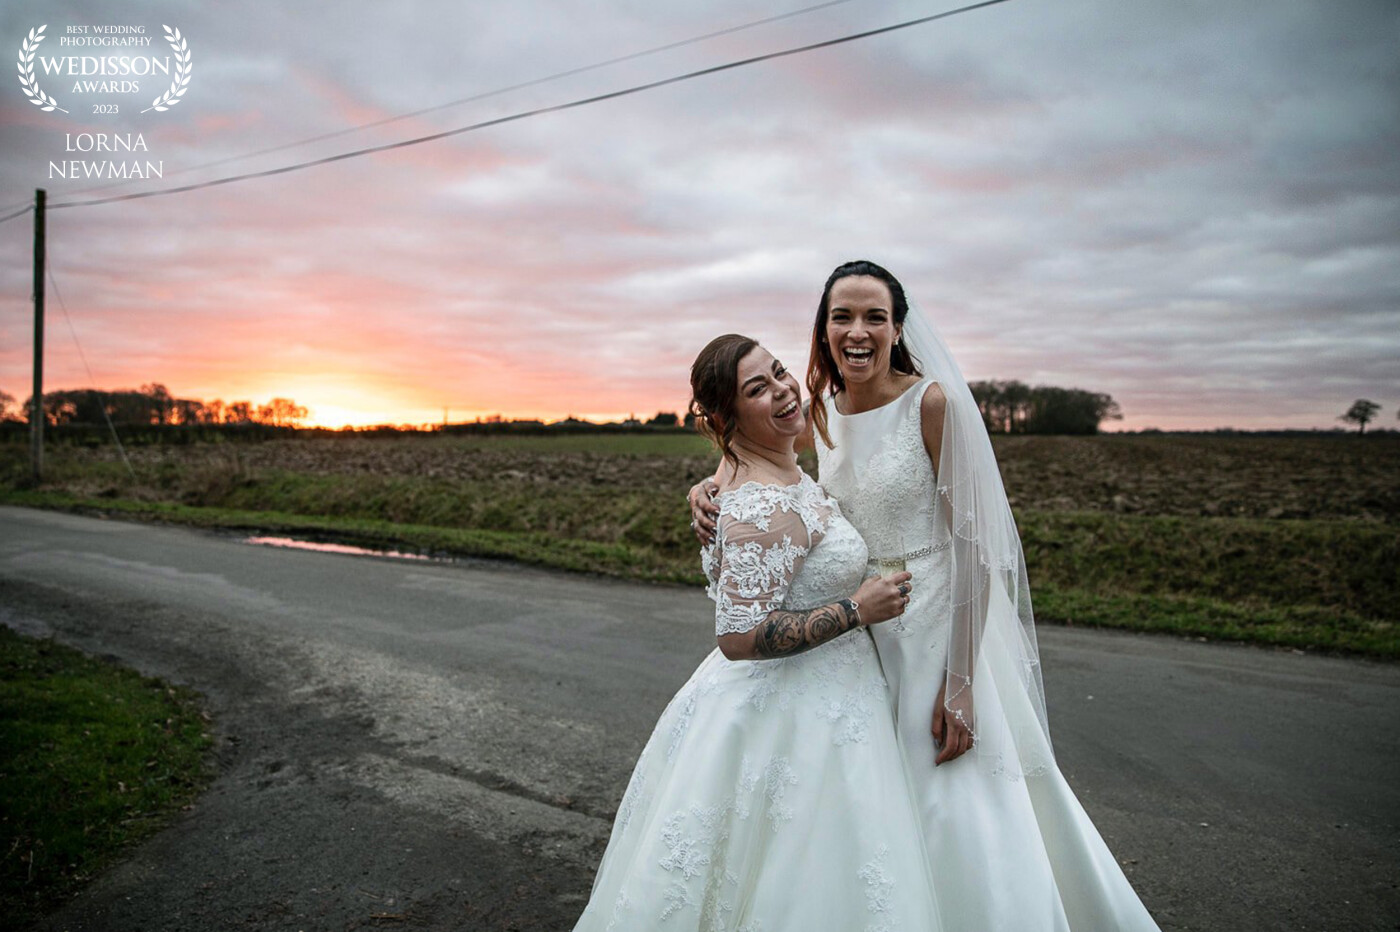 A Shot of Jessica & Racheal togther just as the sun was setting on their beautiful winter wedding day in Essex, UK.